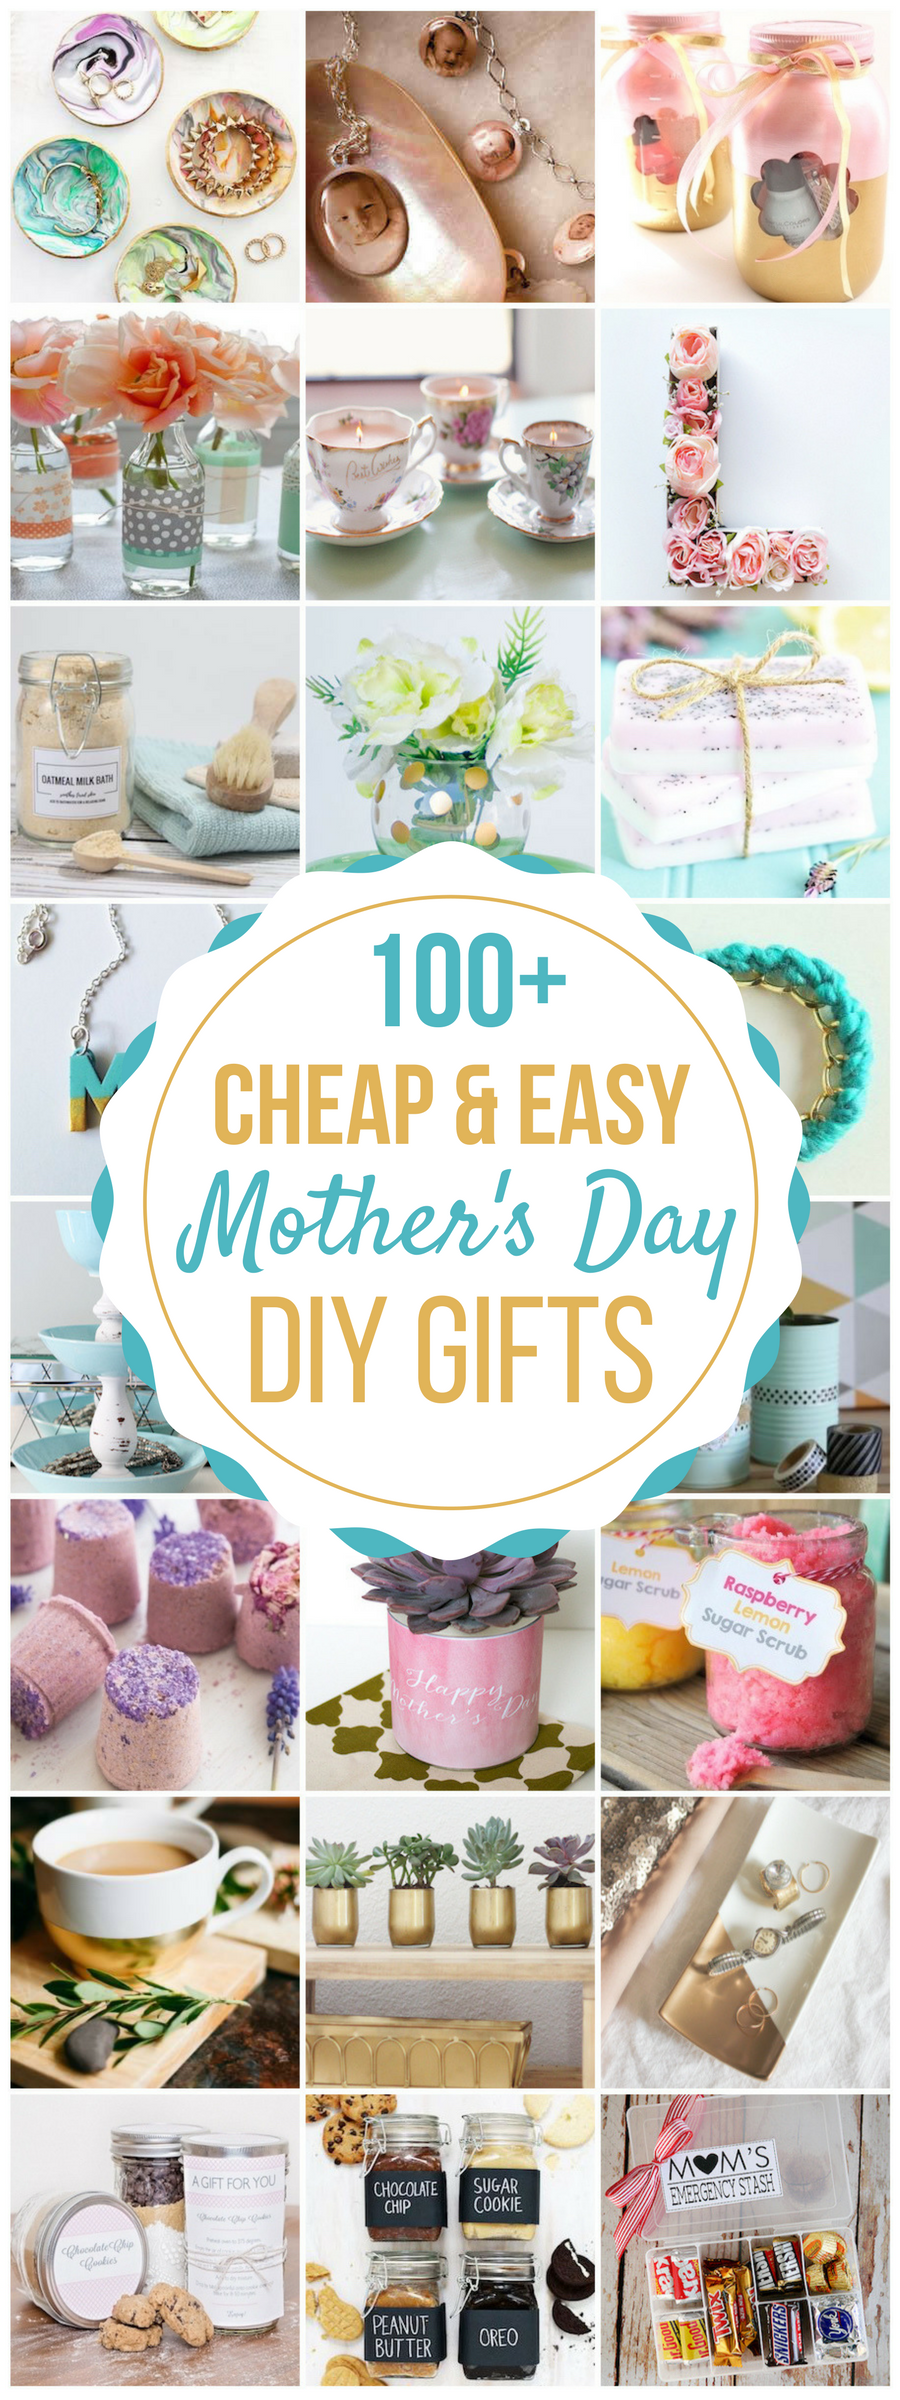 100-cheap-easy-diy-mother-s-day-gifts-prudent-penny-pincher